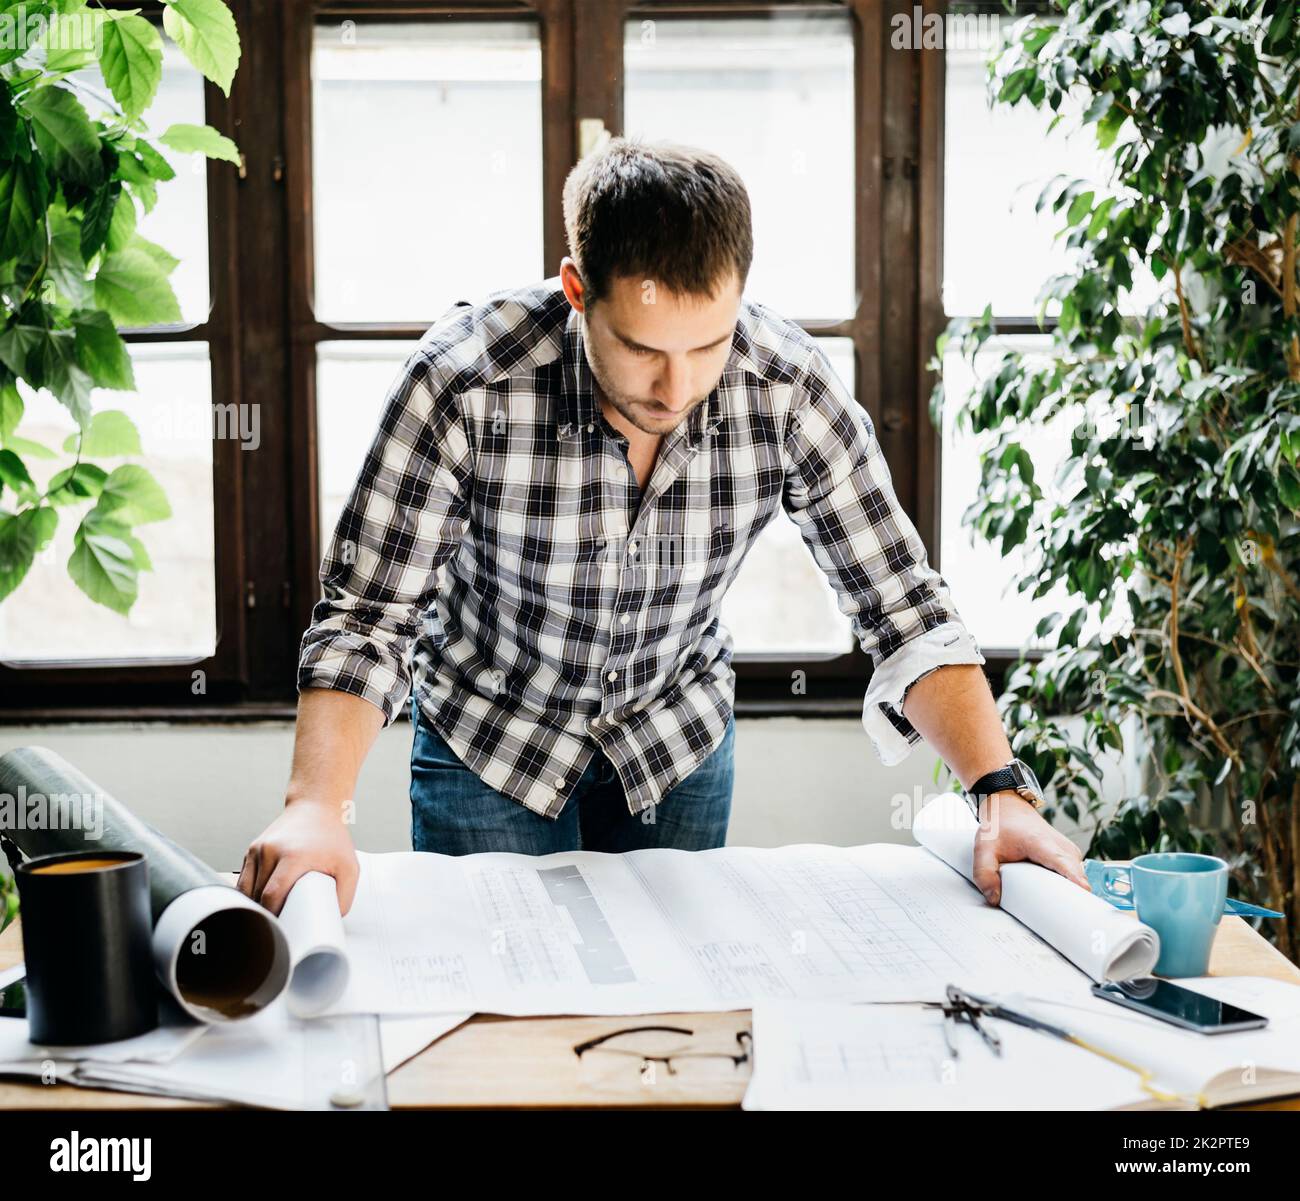 Man working on architectural project Stock Photo